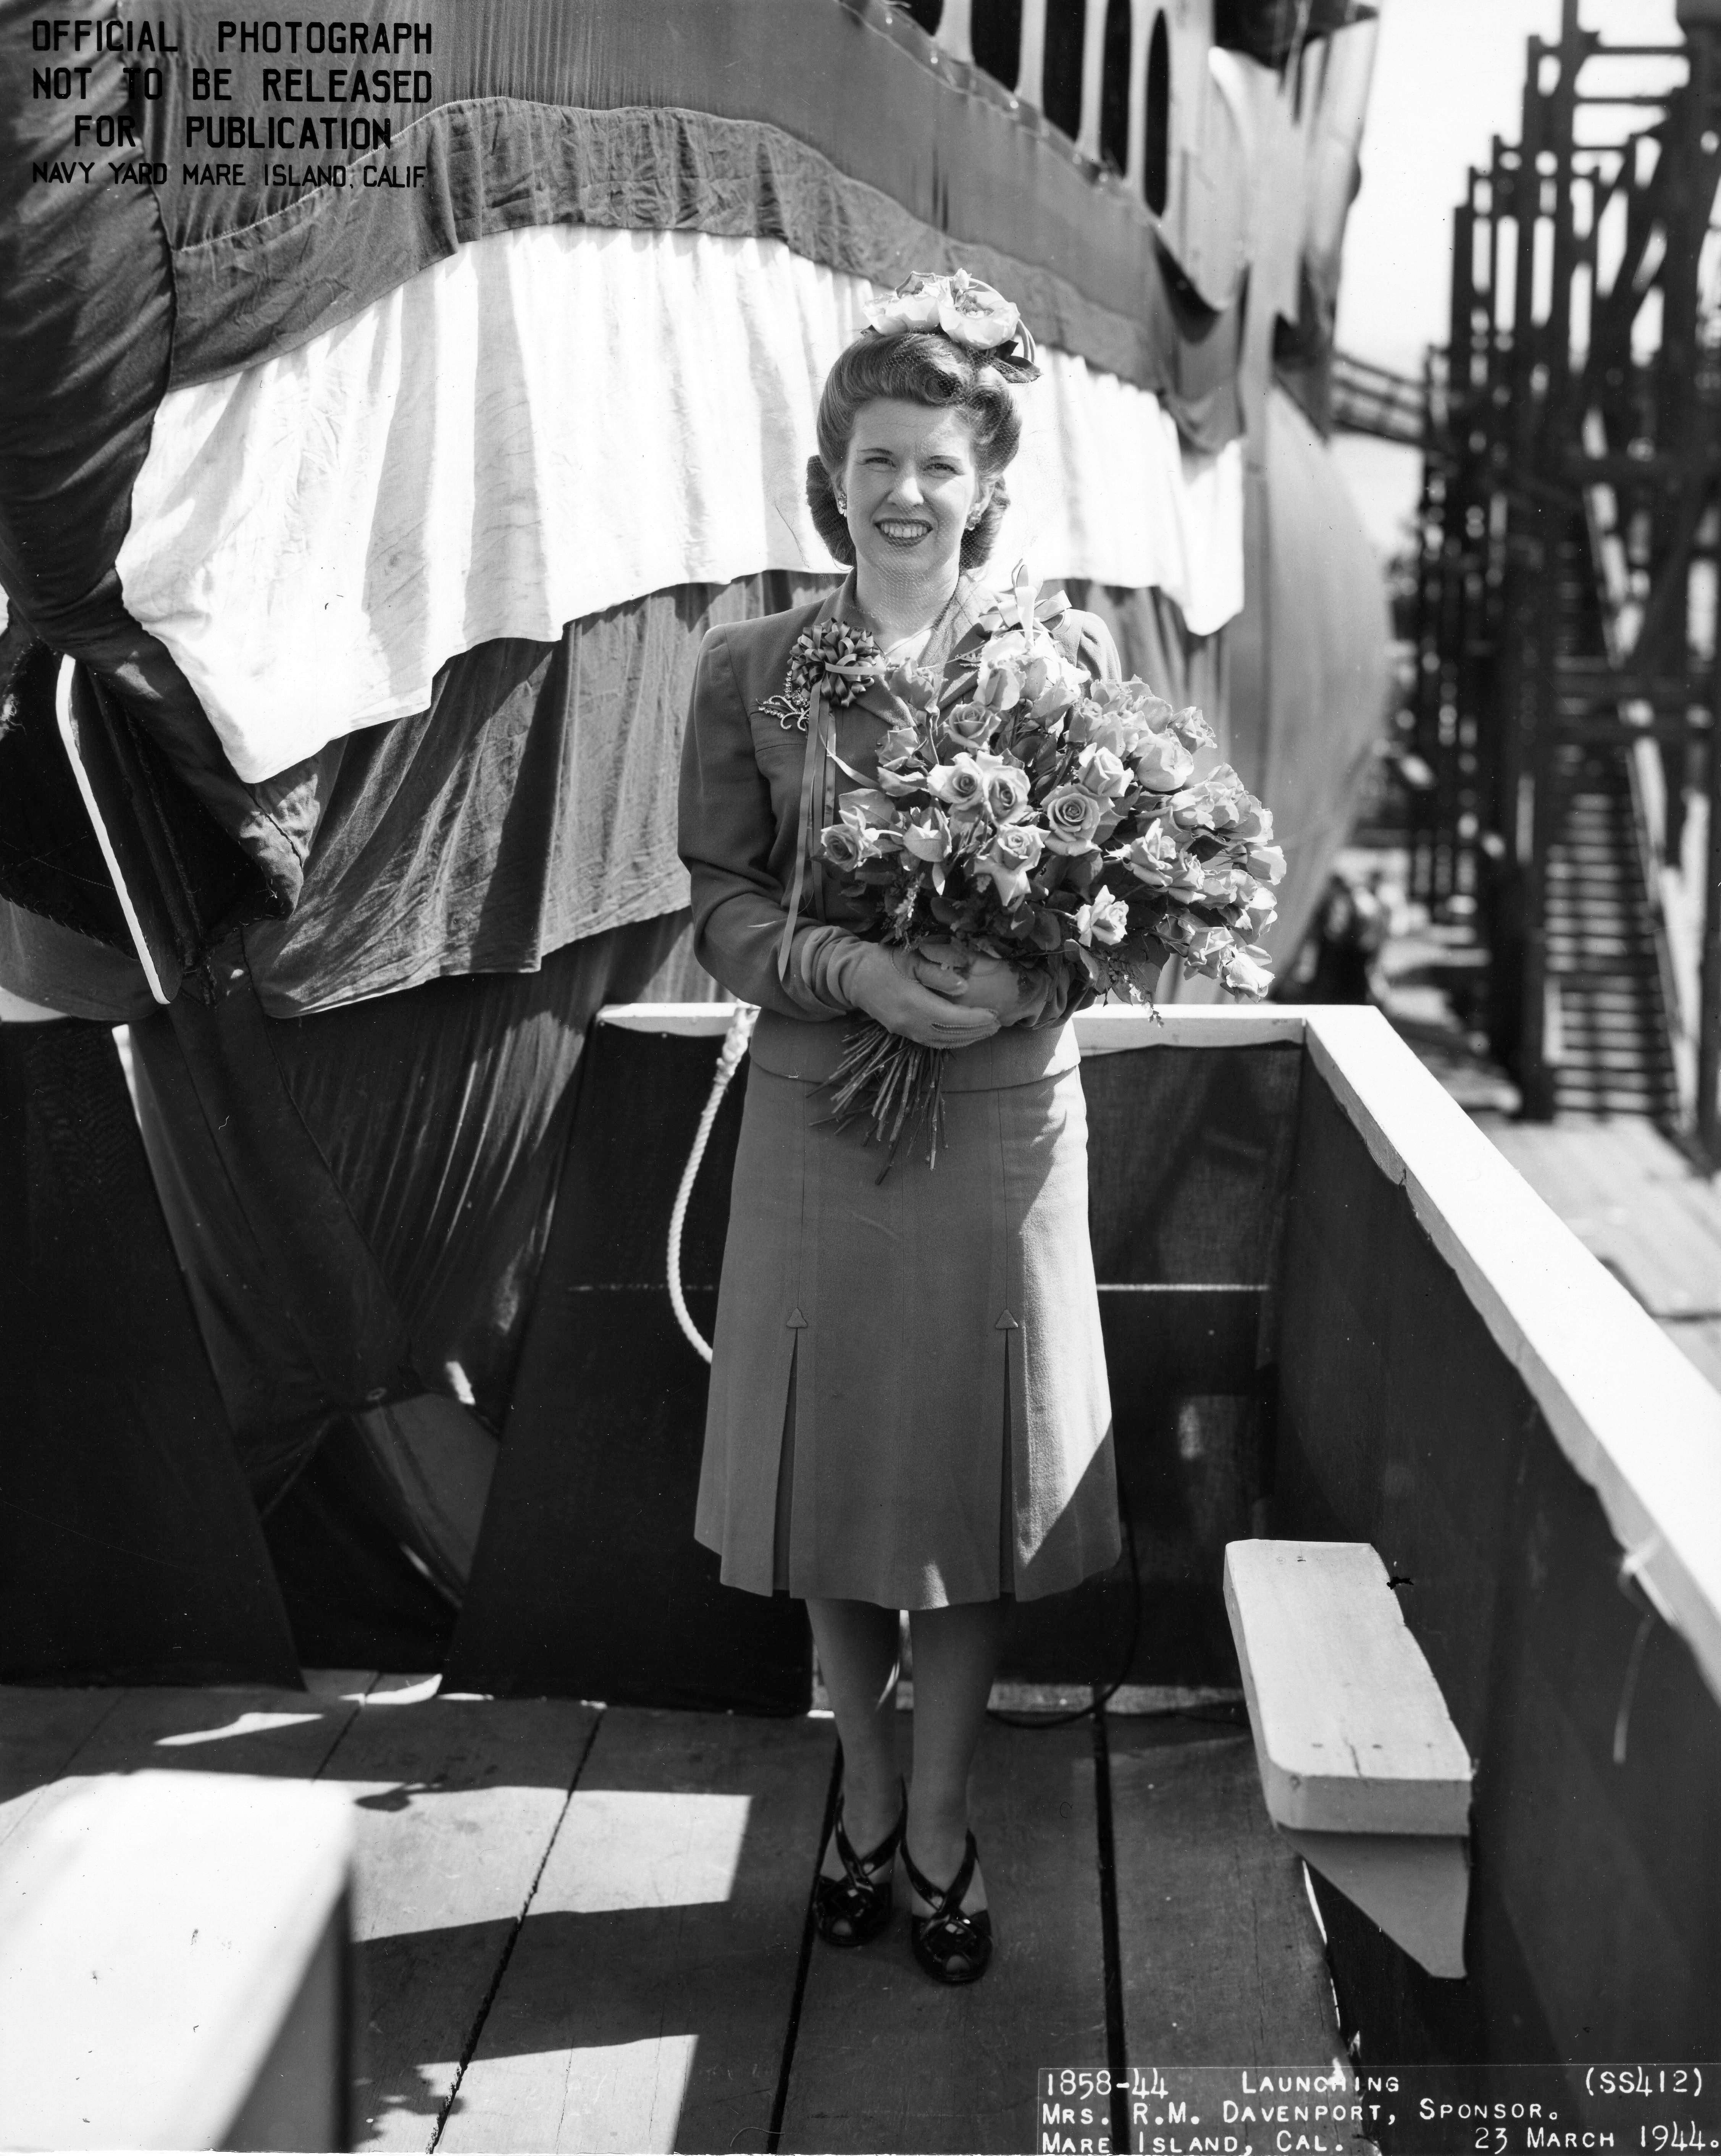 Mrs. Davenport, wife of future commanding officer of Trepang, posing with the submarine at its christening, Mare Island Naval Shipyard, California, United States, 23 Mar 1944